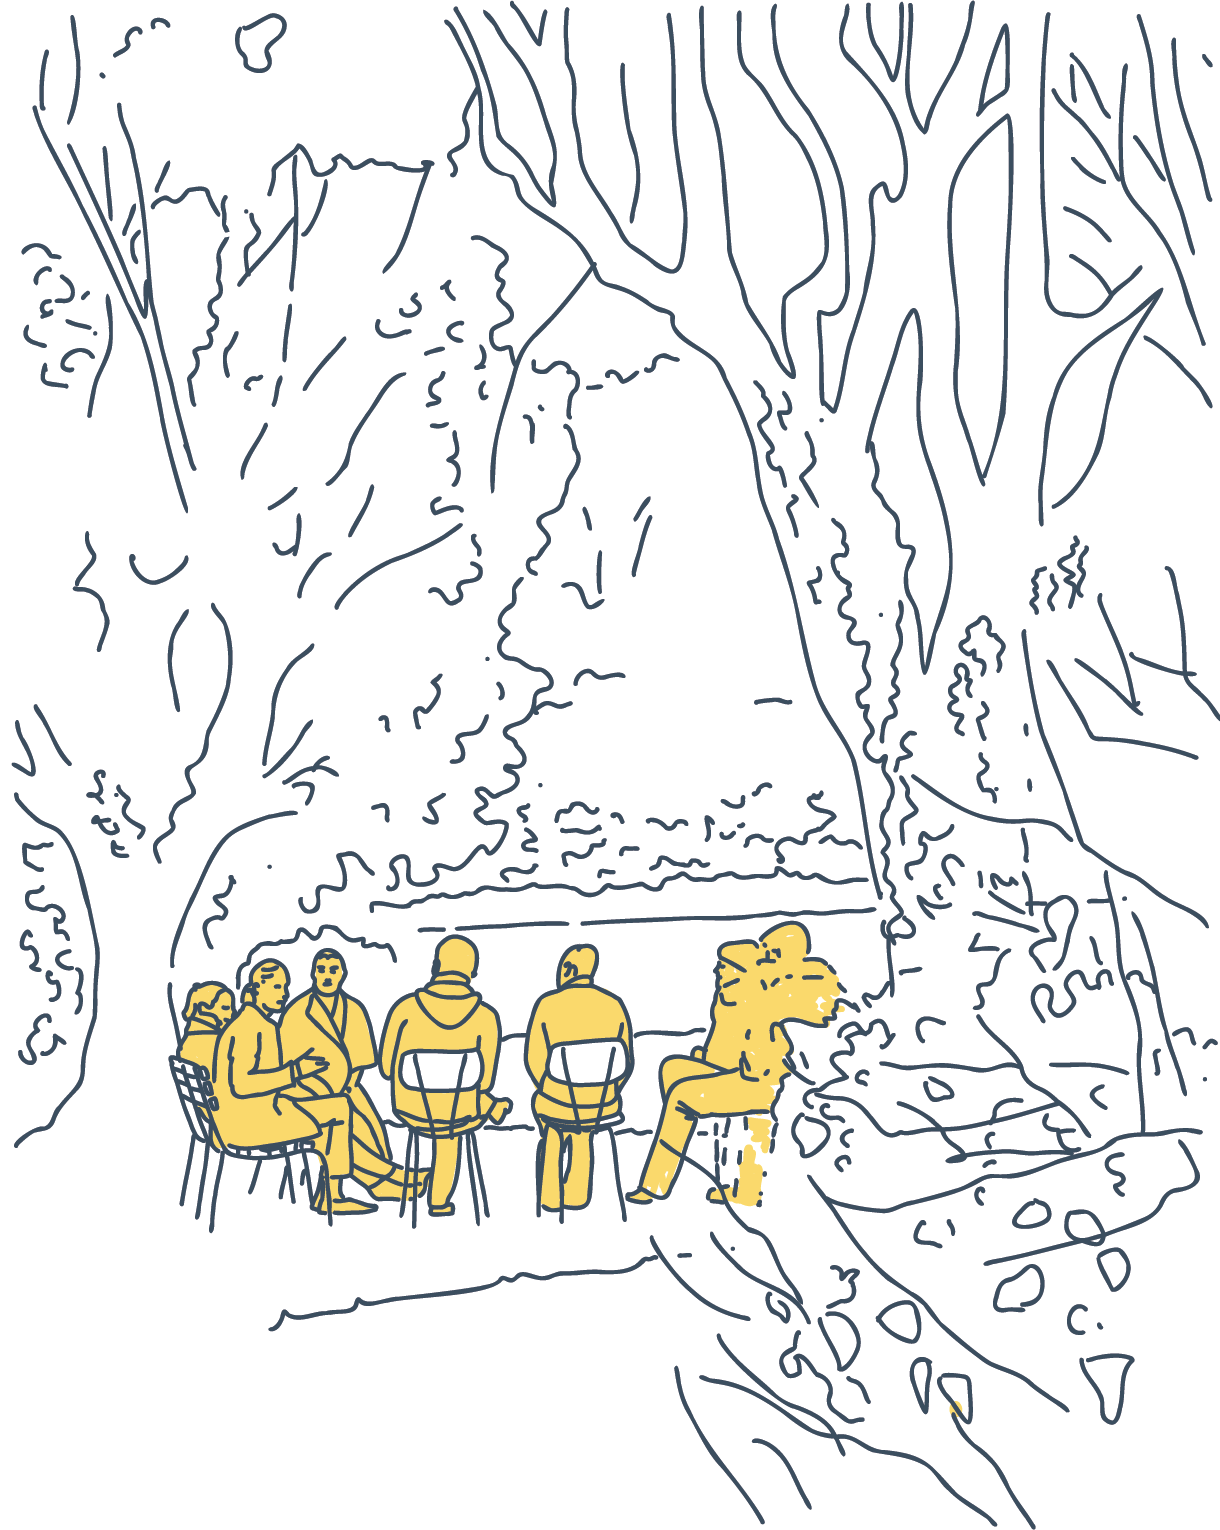 Illustration of a group holding a workshop in a circle under some trees in a garden.